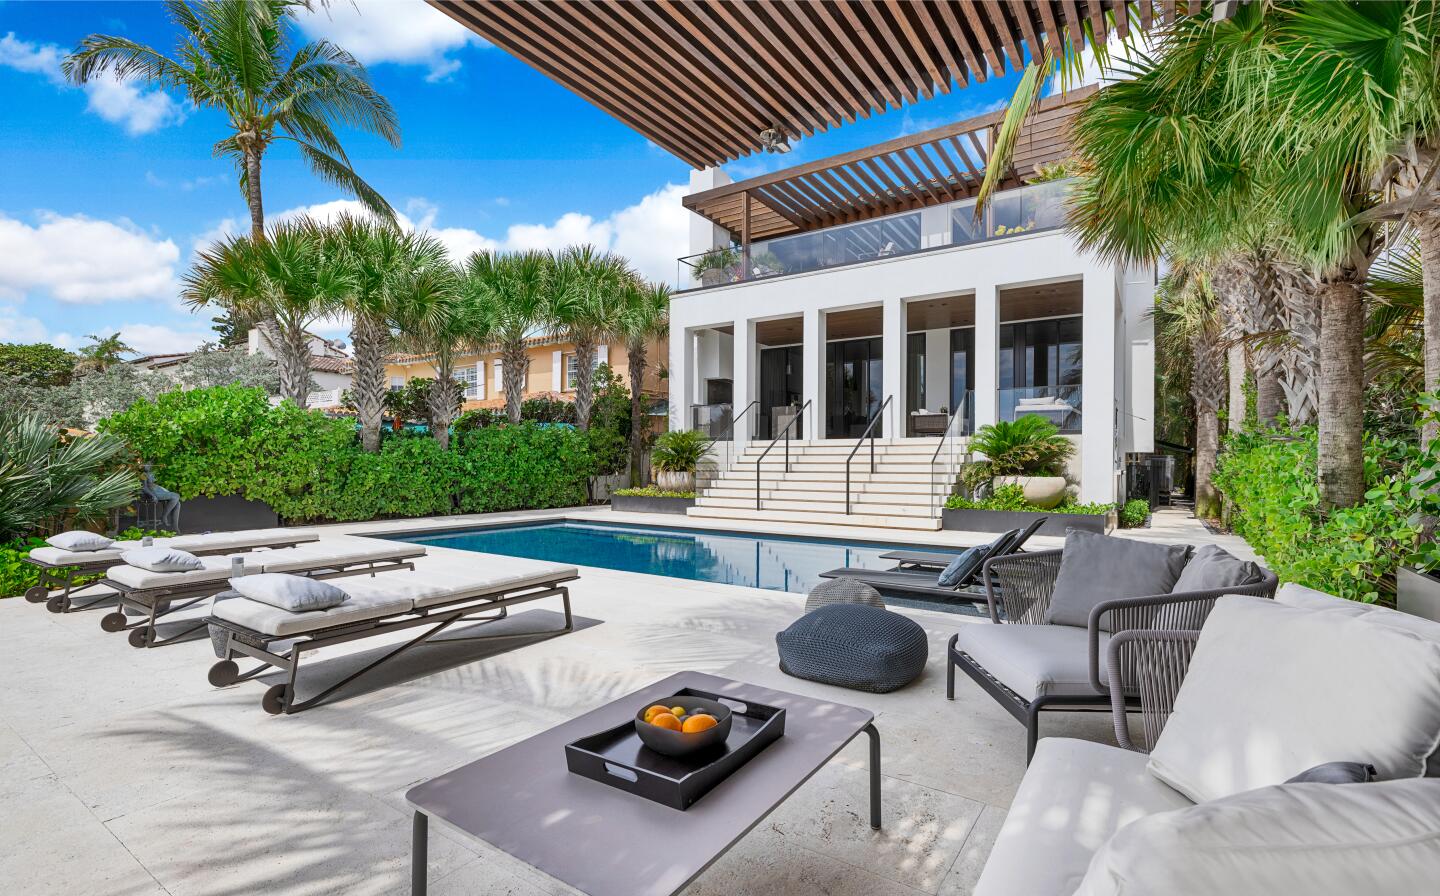 The cabana is next to a pool and the house and has poolside furniture.